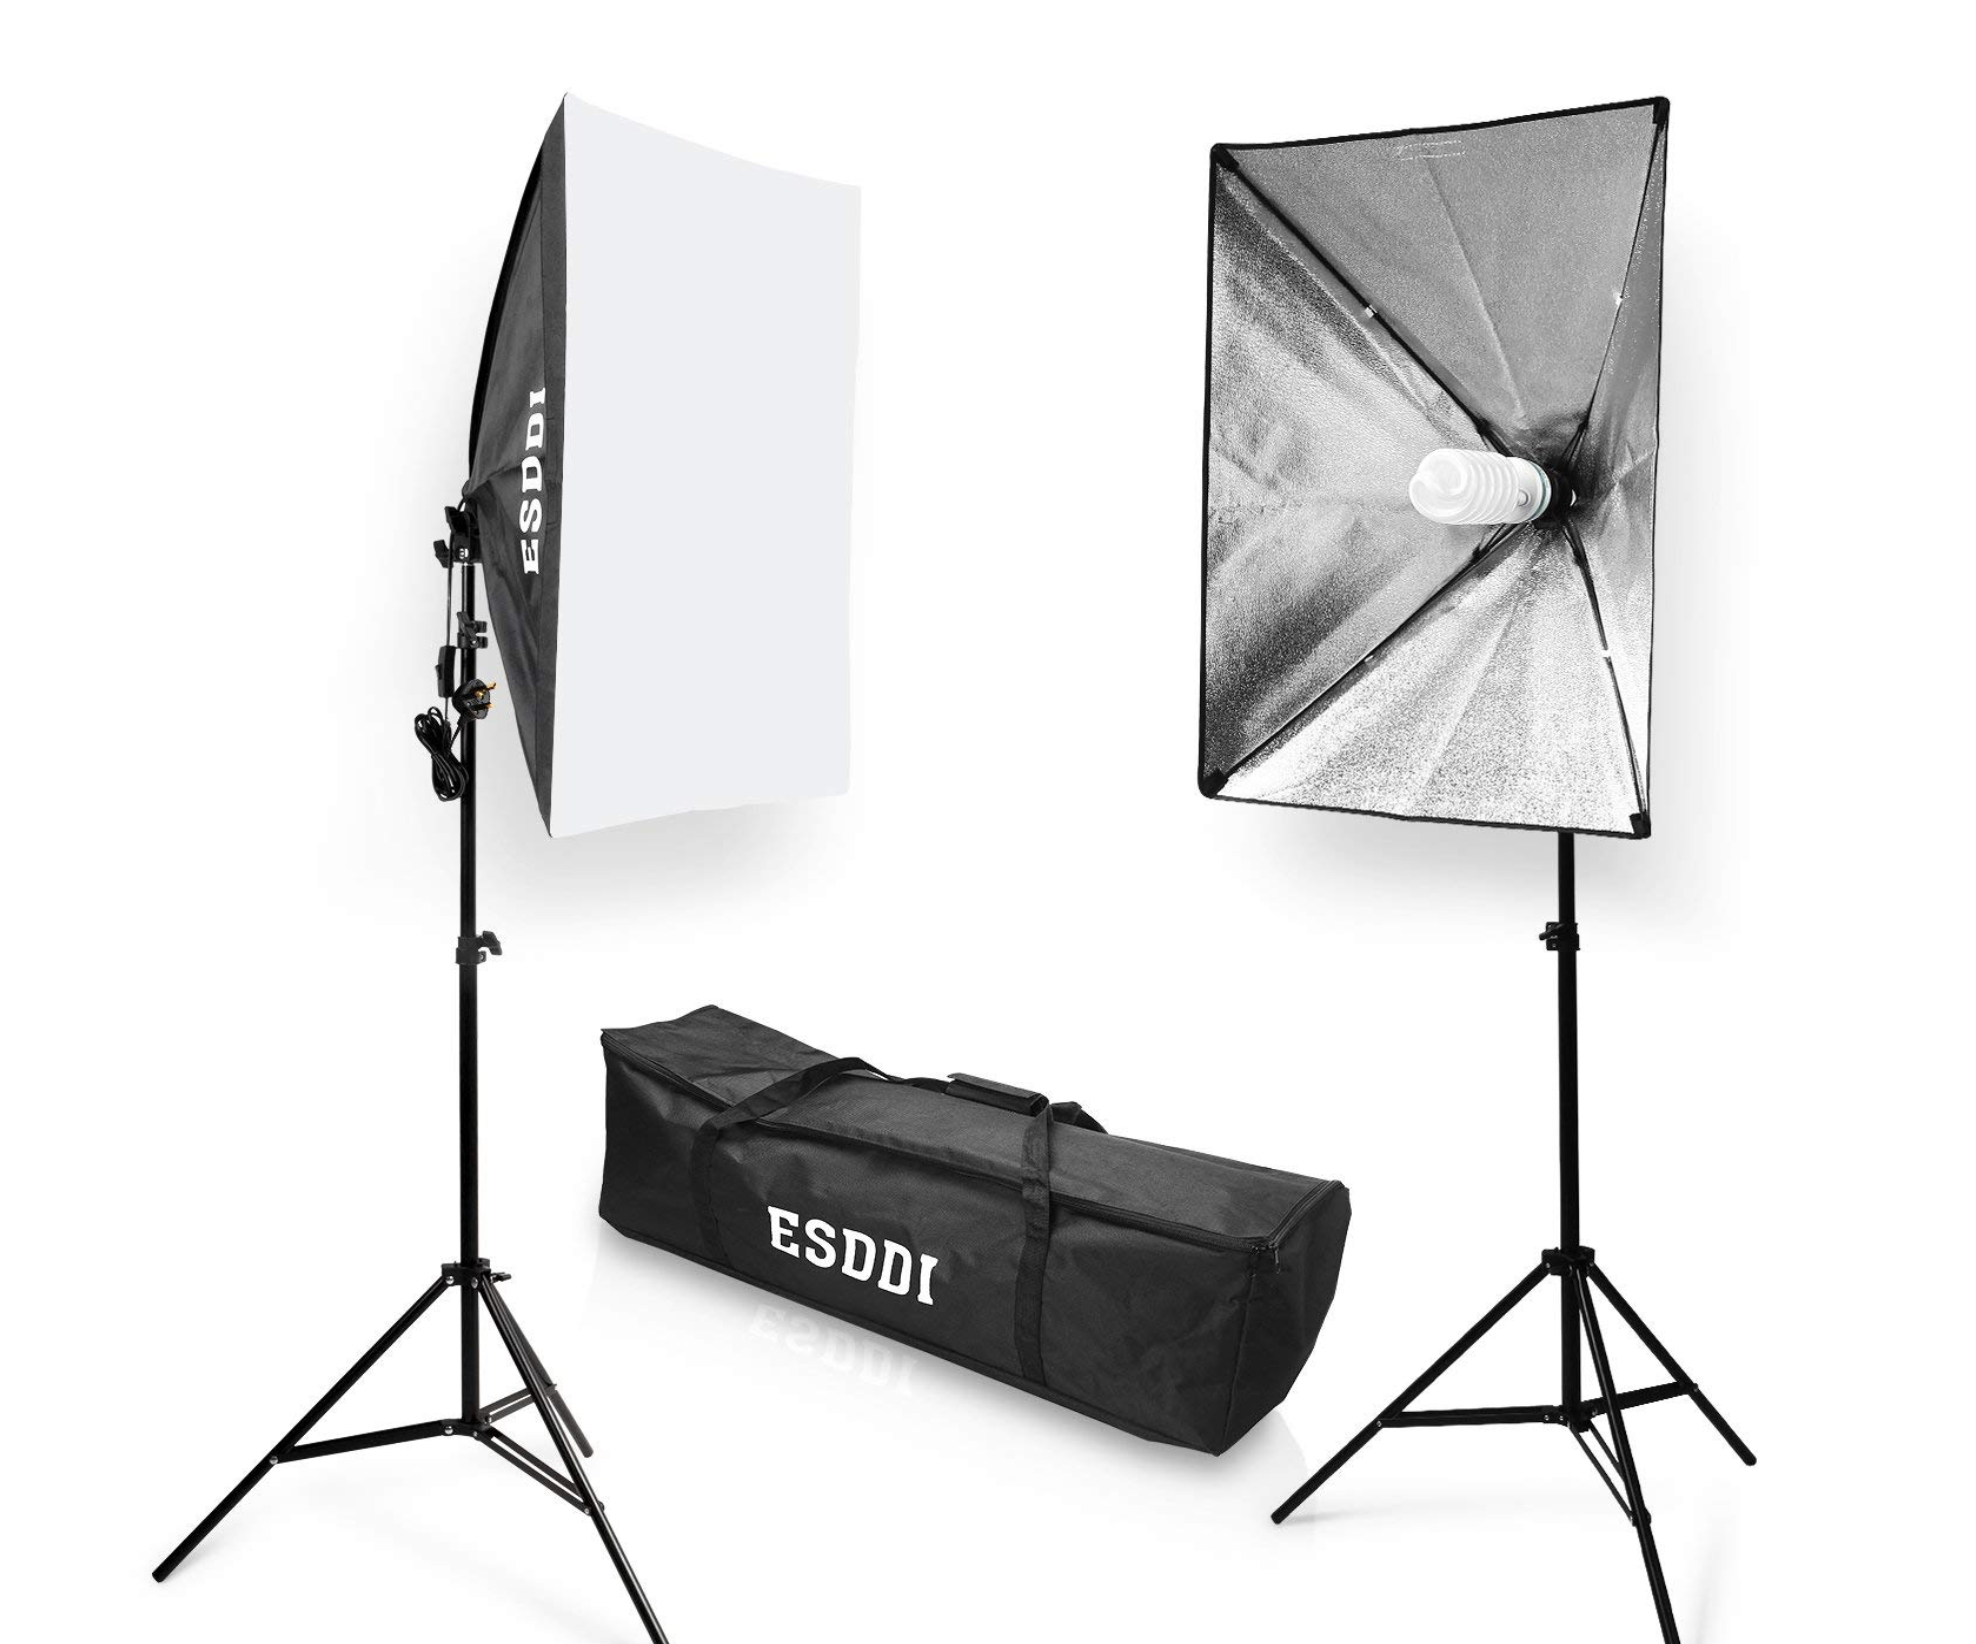 8 Lighting For Budget // Photography and — Micro Nerds